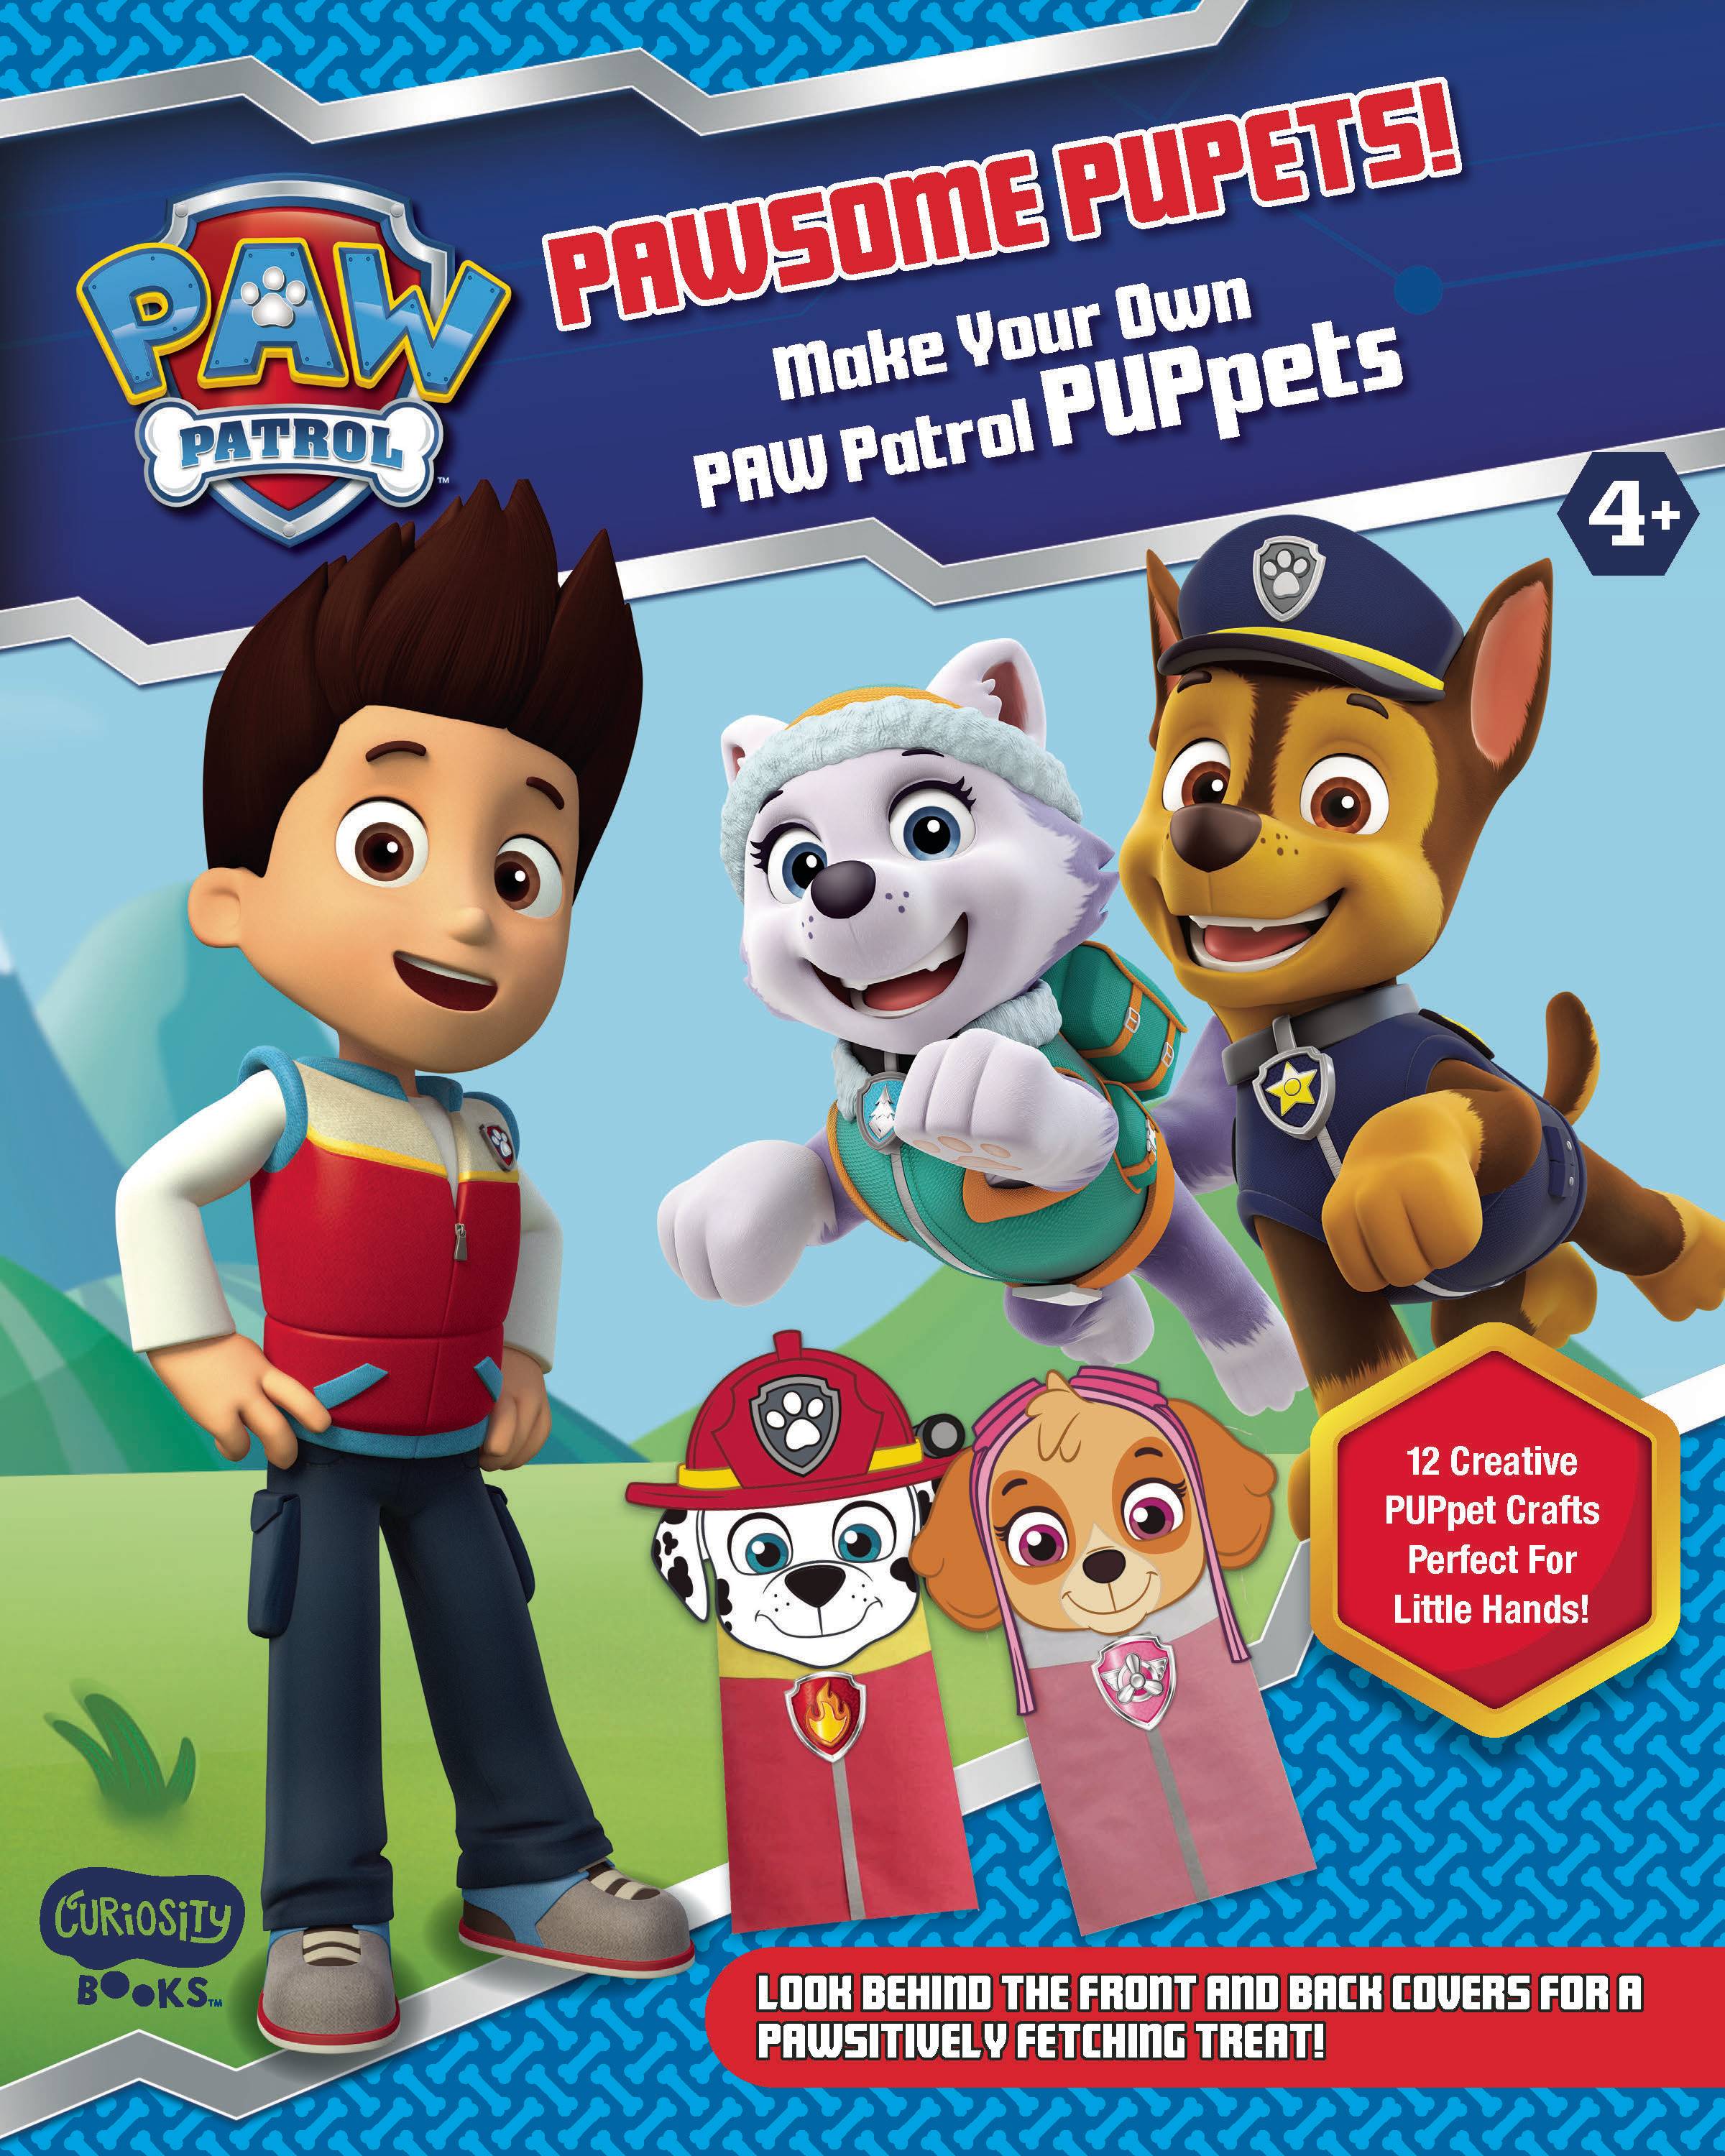 PAWSOME PUPPETS MAKE YOUR OWN PAW PATROL PUPPETS SC